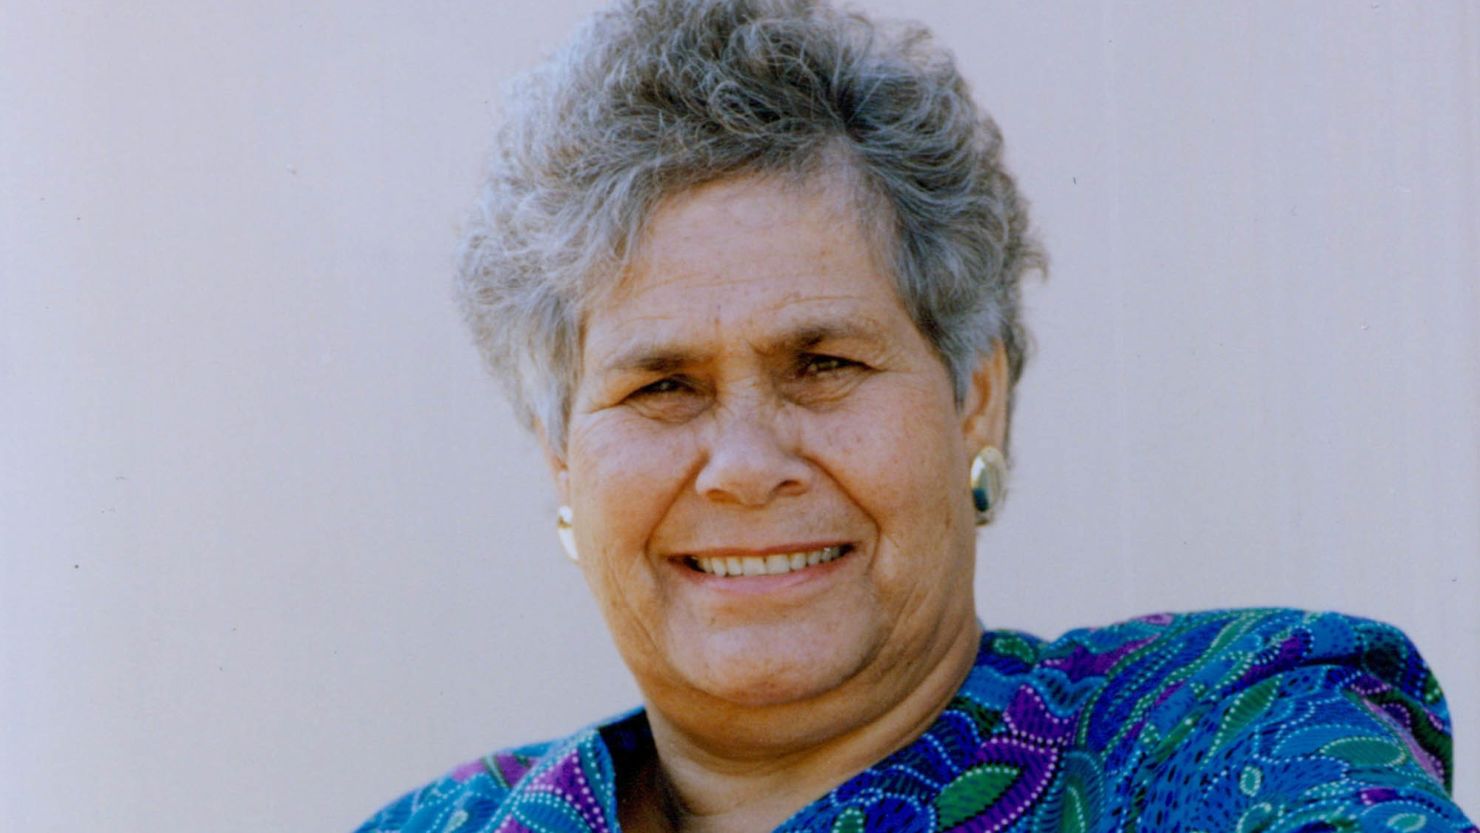 Tributes have poured in for Lowitja O'Donoghue, a leading campaigner for indigenous people in Australia.